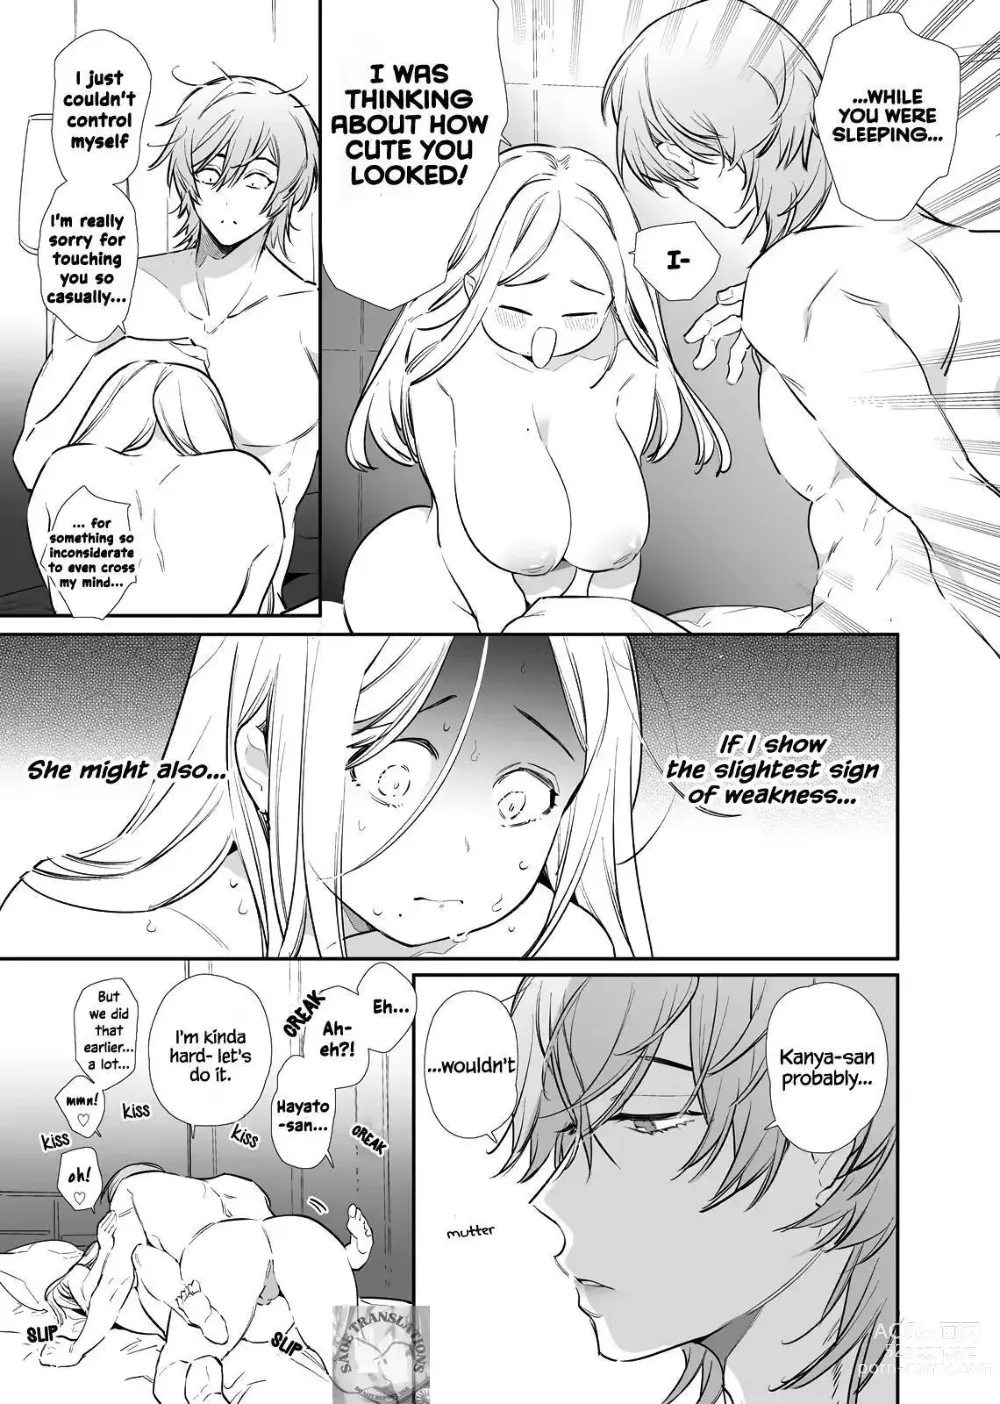 Page 72 of doujinshi Kana-san NTR ~ Degradation of a Housewife by a Guy in an Alter Account ~ (decensored)